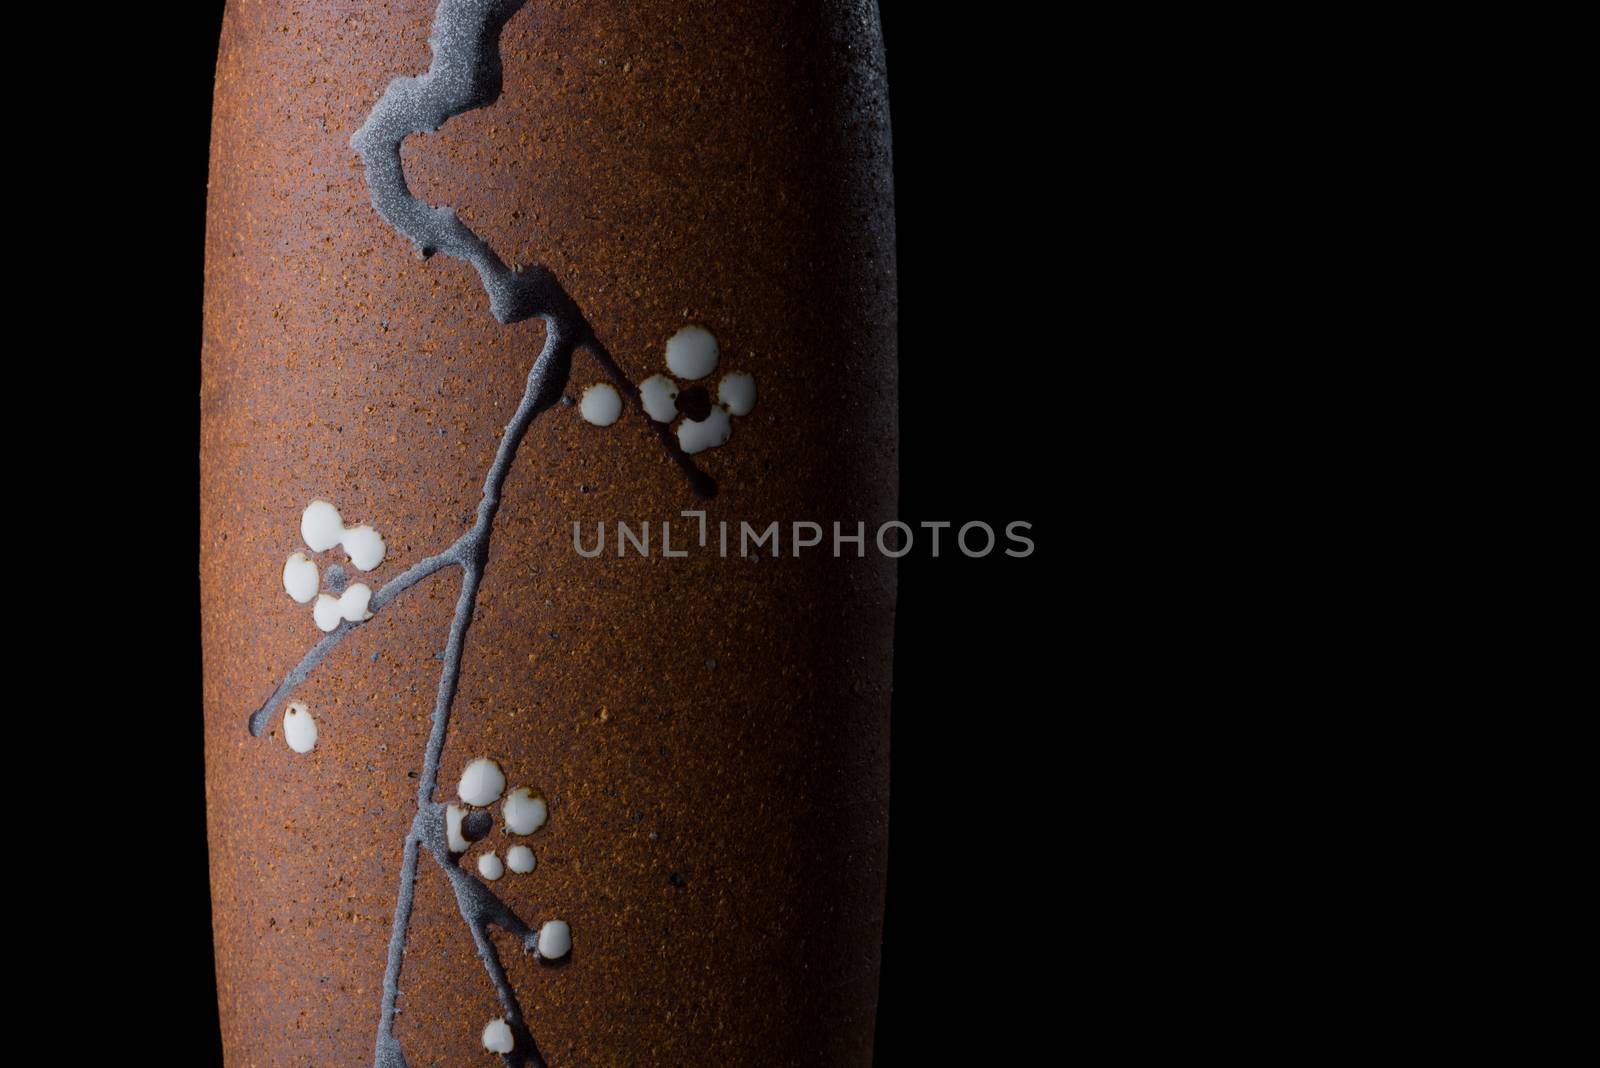 A Japanese vase painted with a branch from a cherry blossom tree dramatically lit and isolated on a black background.